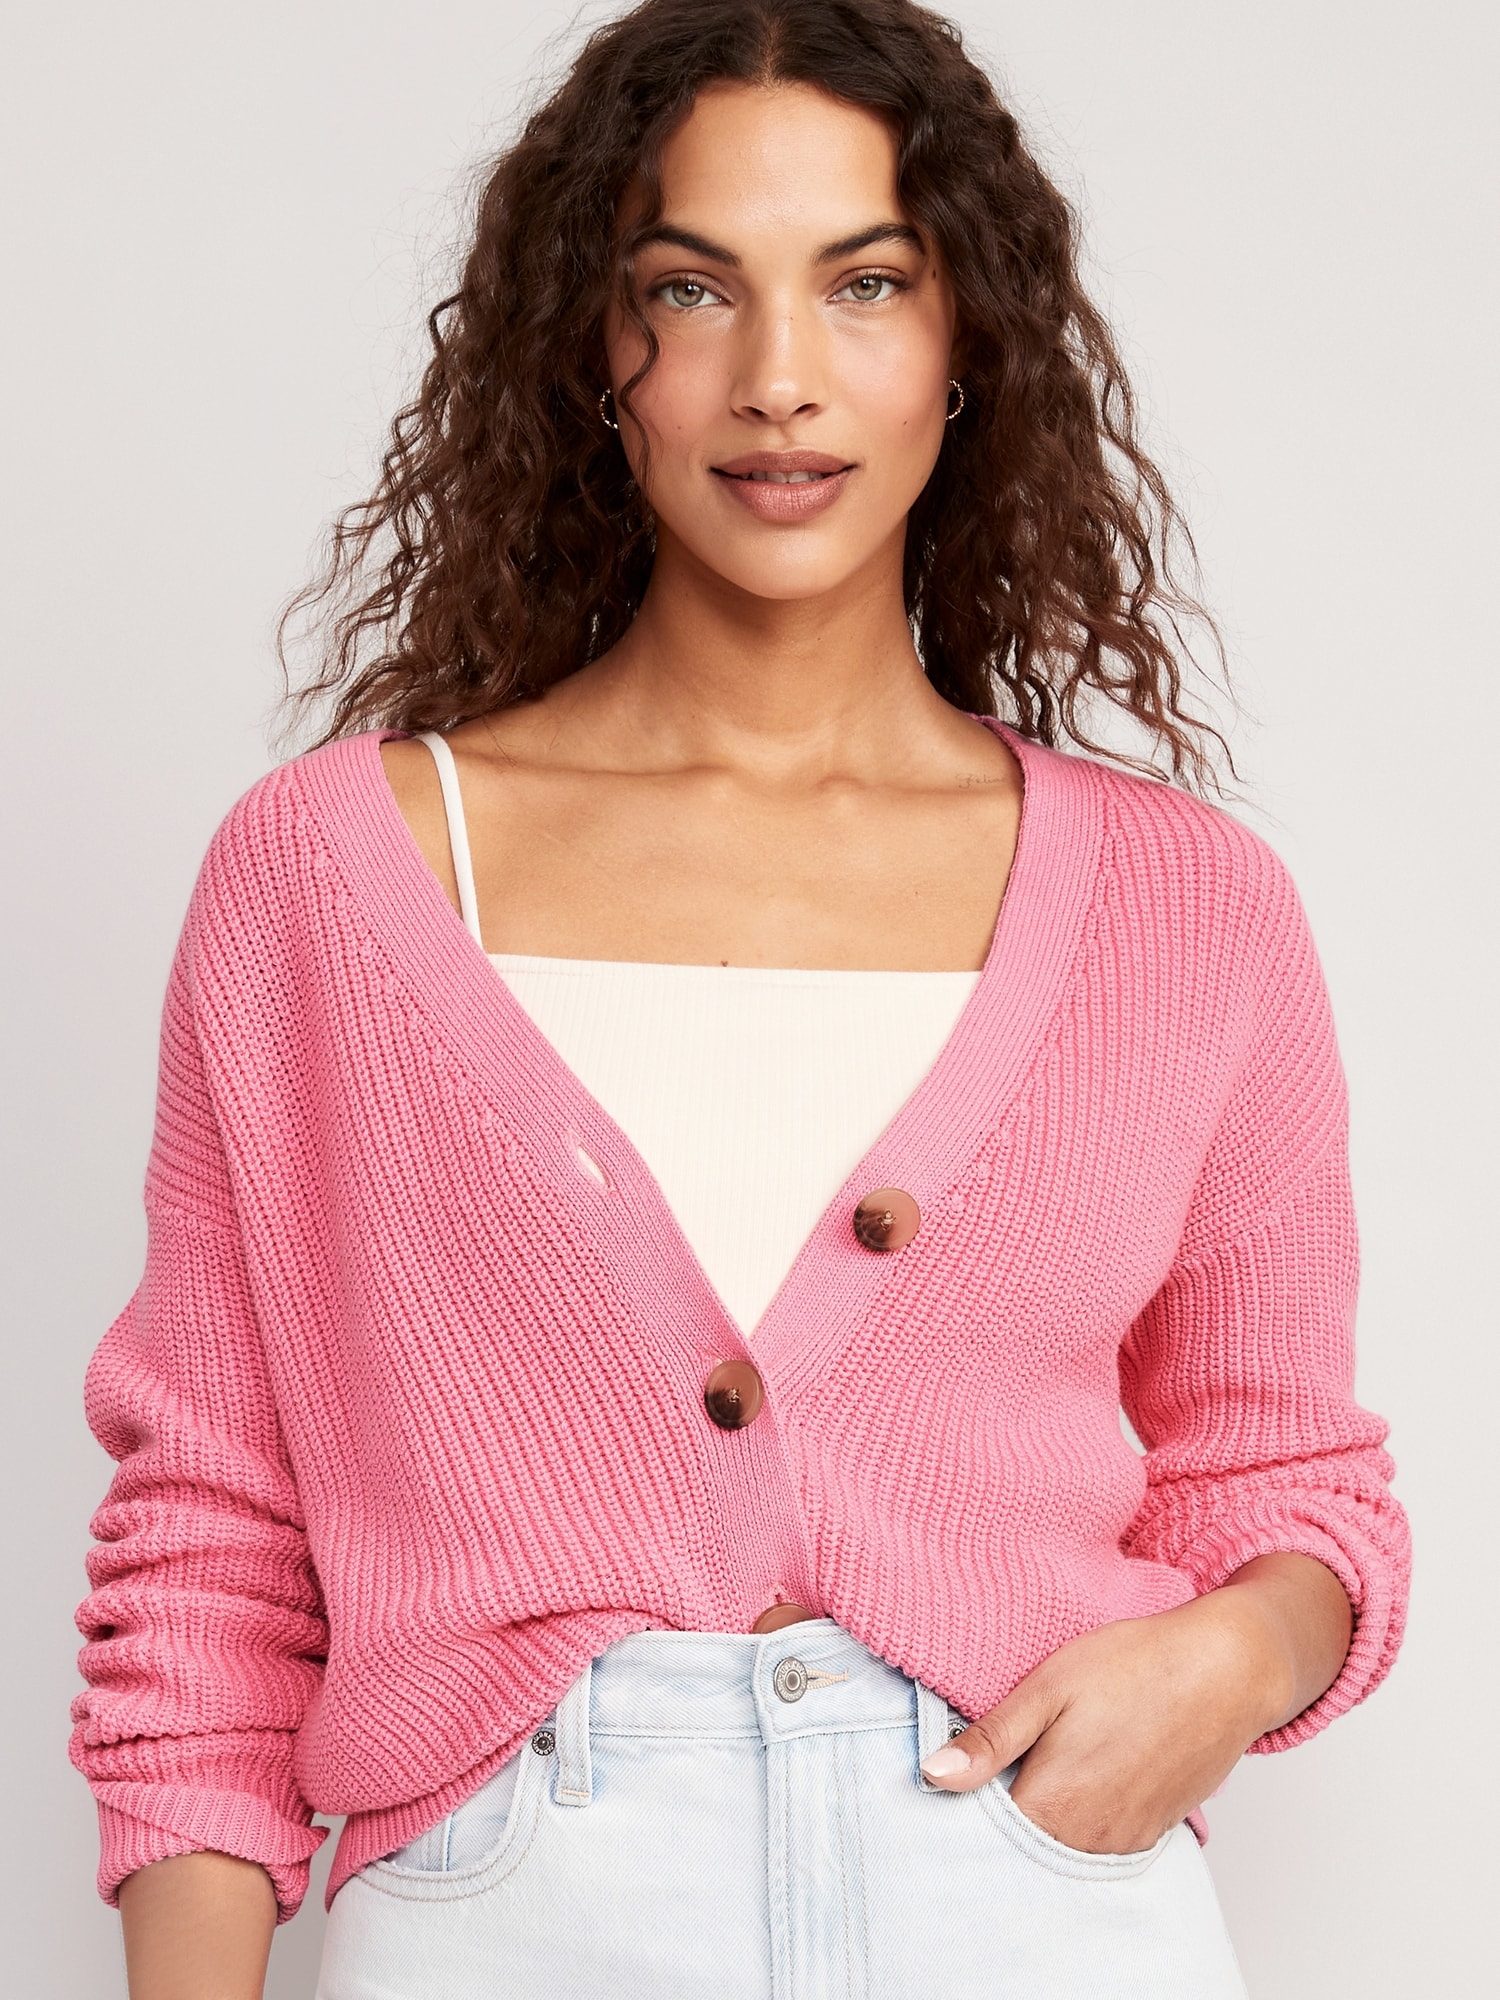 Old Navy Lightweight Cotton and Linen-Blend Shaker-Stitch Cardigan Sweater for Women pink. 1